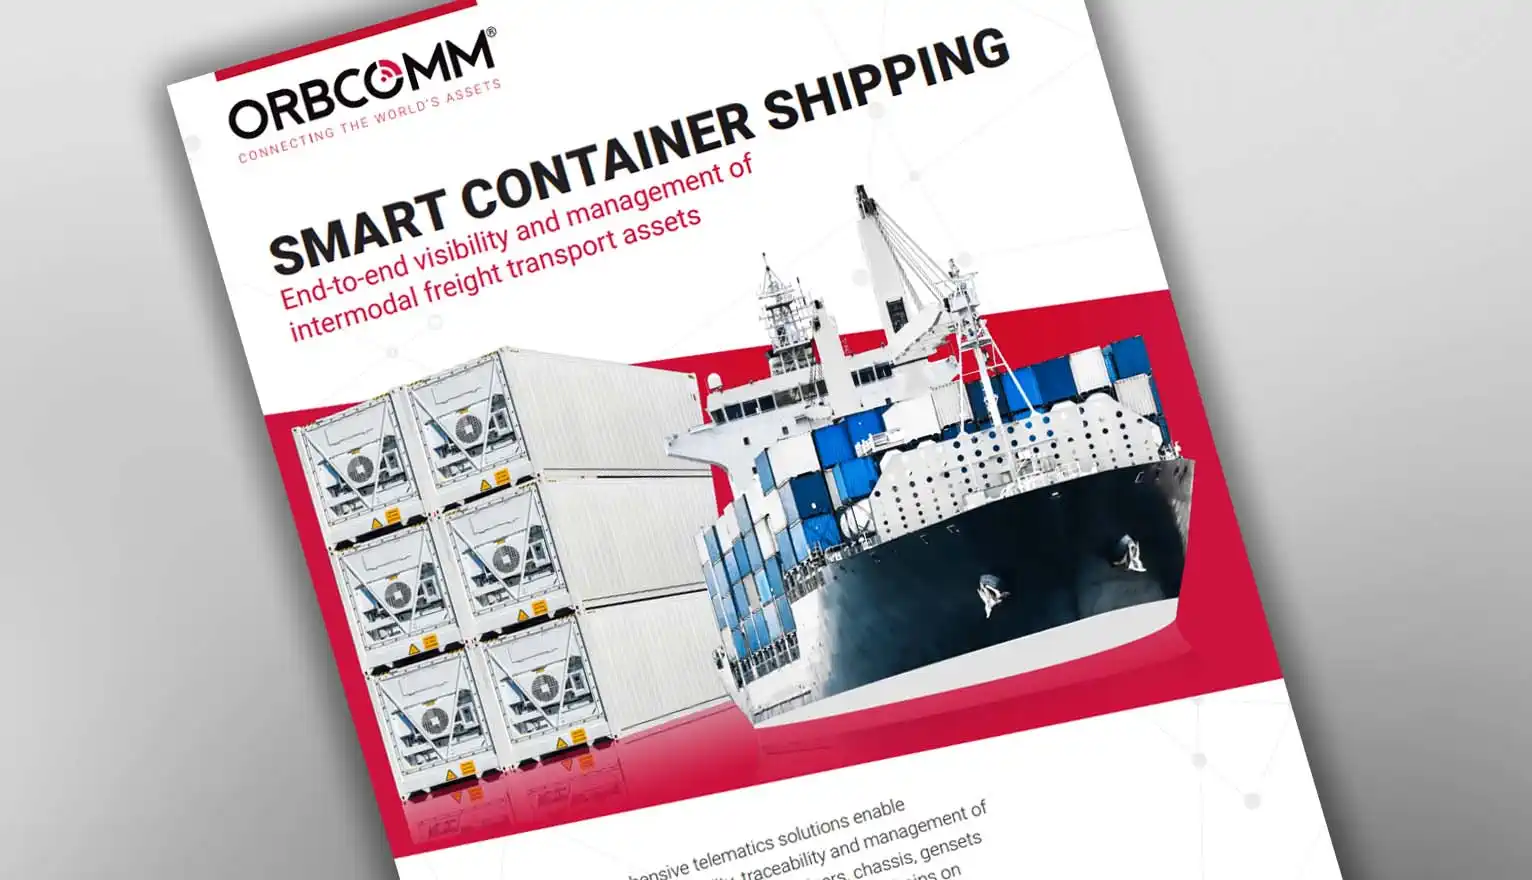 Smart container shepping